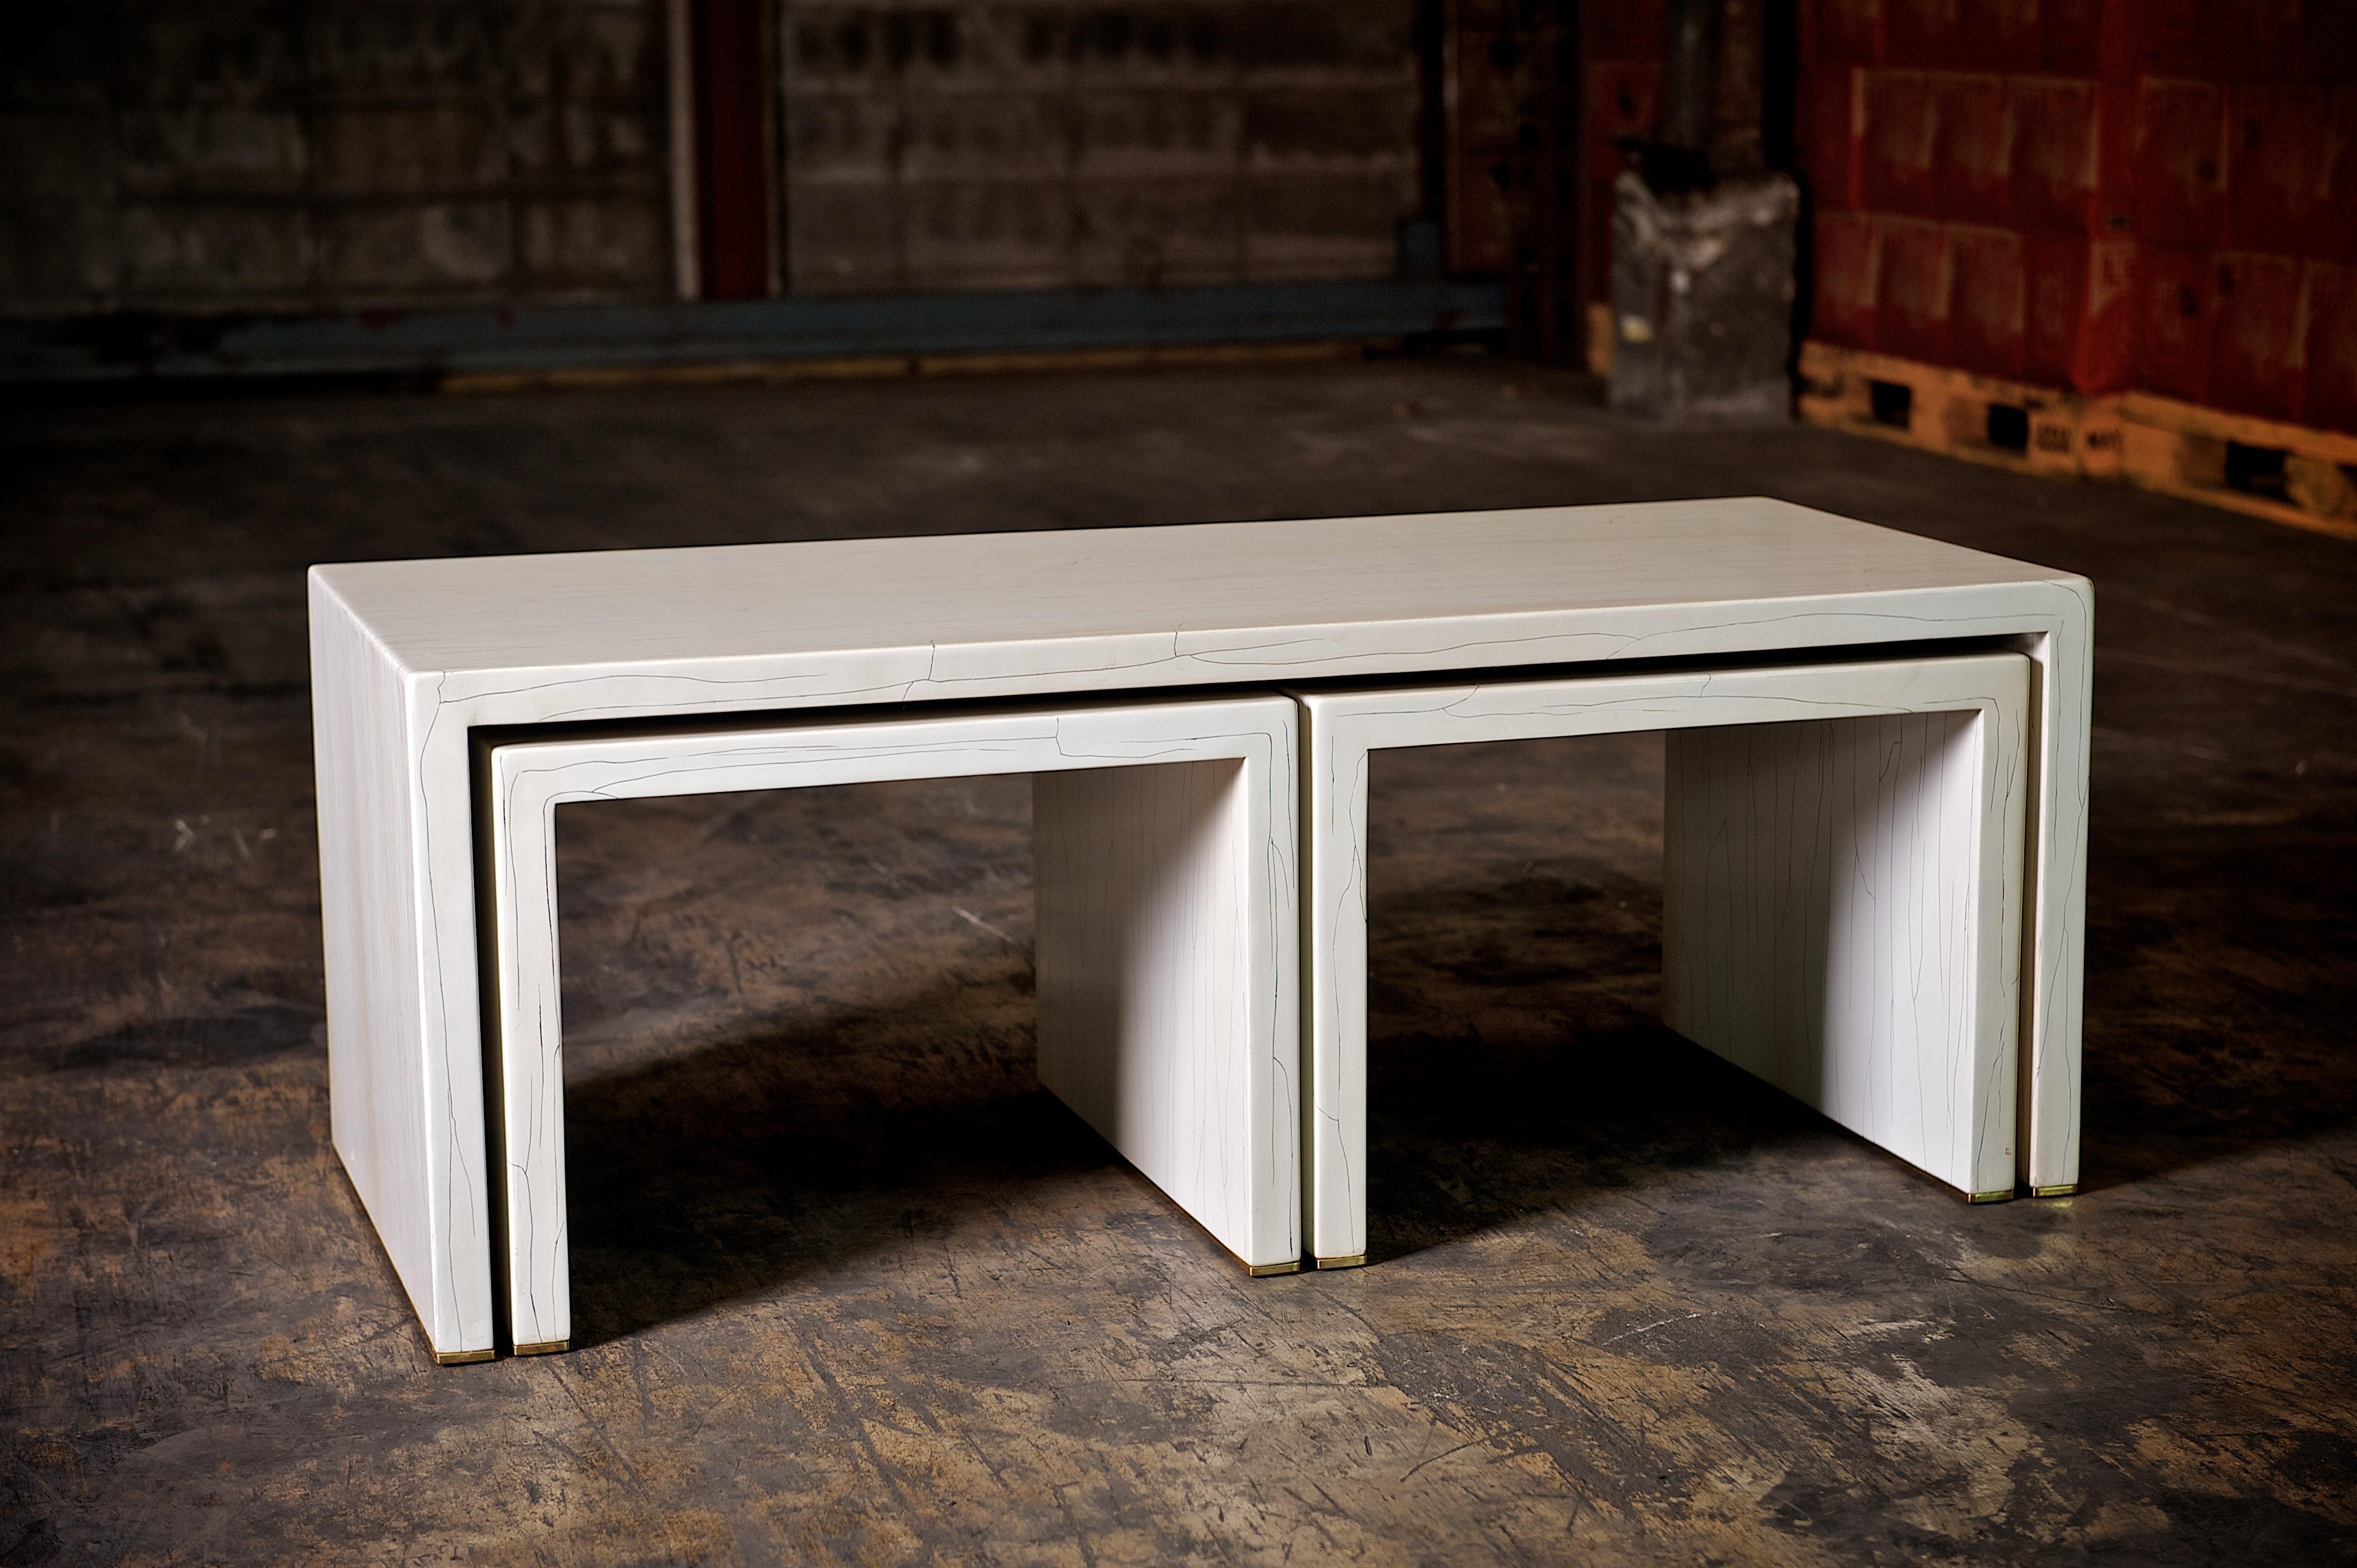 European Ivory Gesso Nesting Coffee Table in White Finish by Elan Atelier